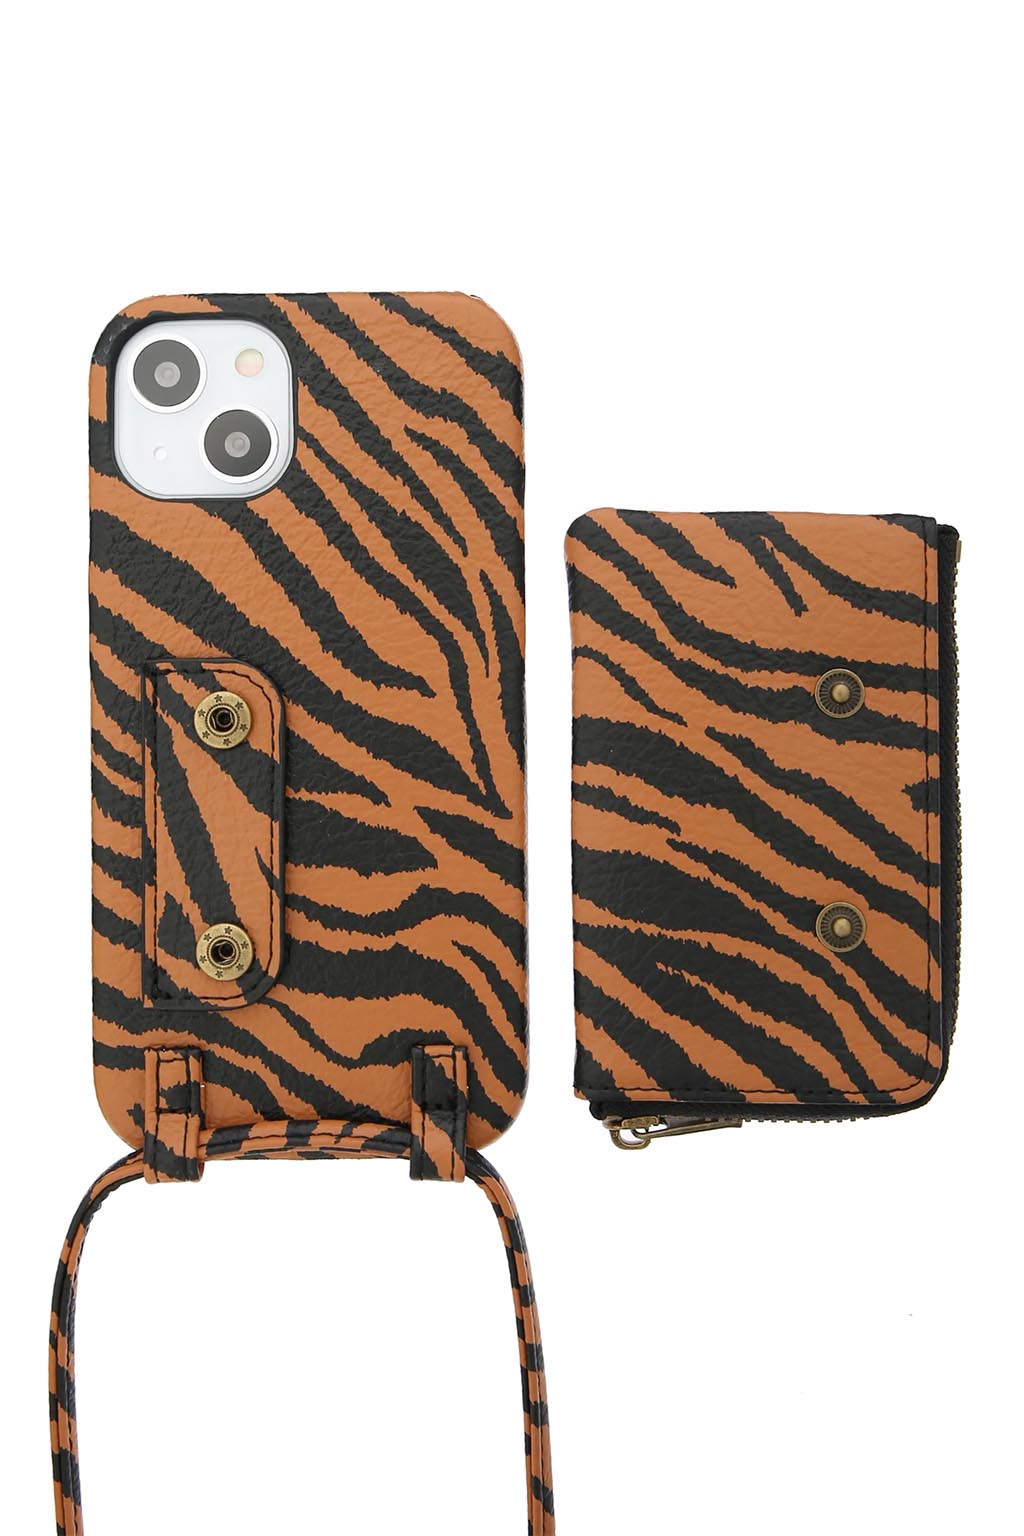 Eco Leather iPhone Case With Strap Zebra 6